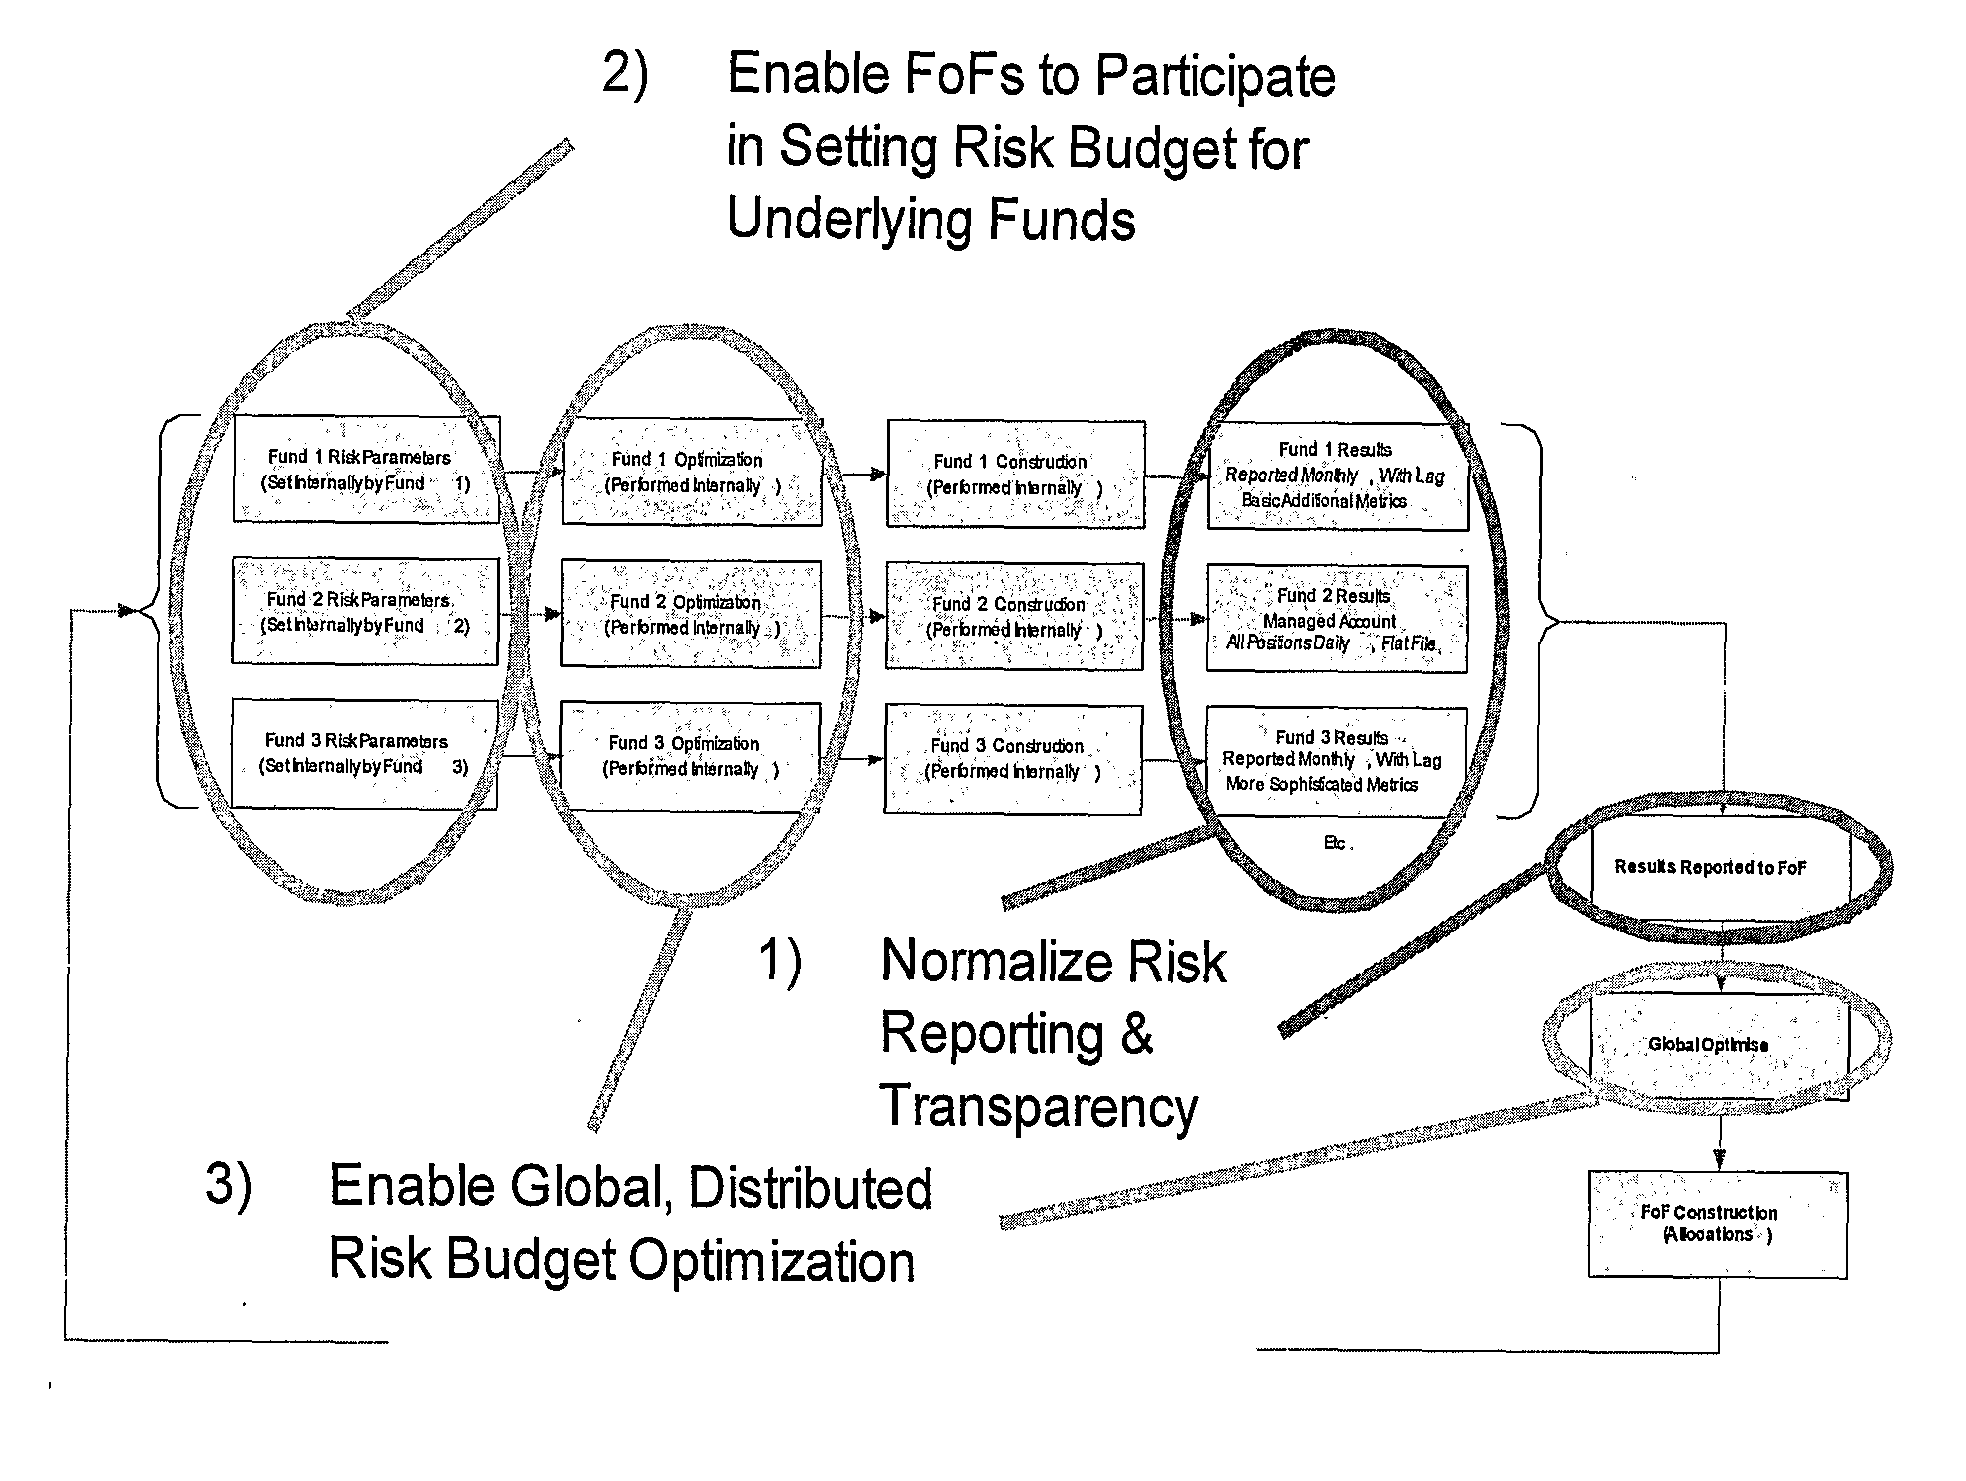 Secure Communication Network Operating Between a Cental Administrator, Operating as a Hedge Fund of Funds, and Numerous Separate Investment Funds